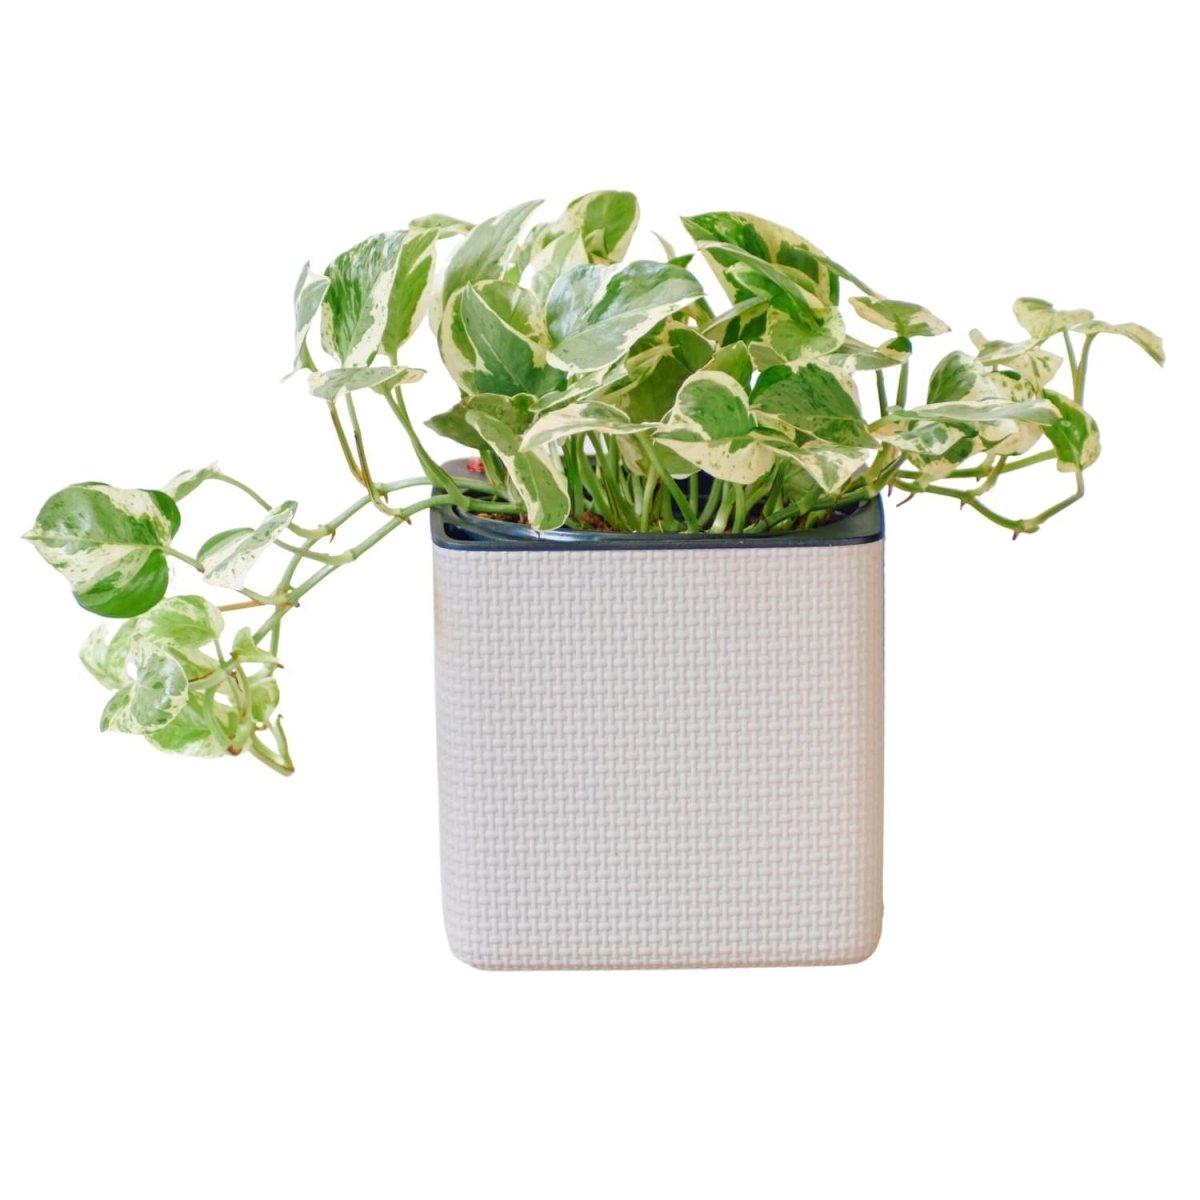 Pothos Pearls And Jade Placed In Lechuza Cube 16 Planter - Sand Brown - My City Plants